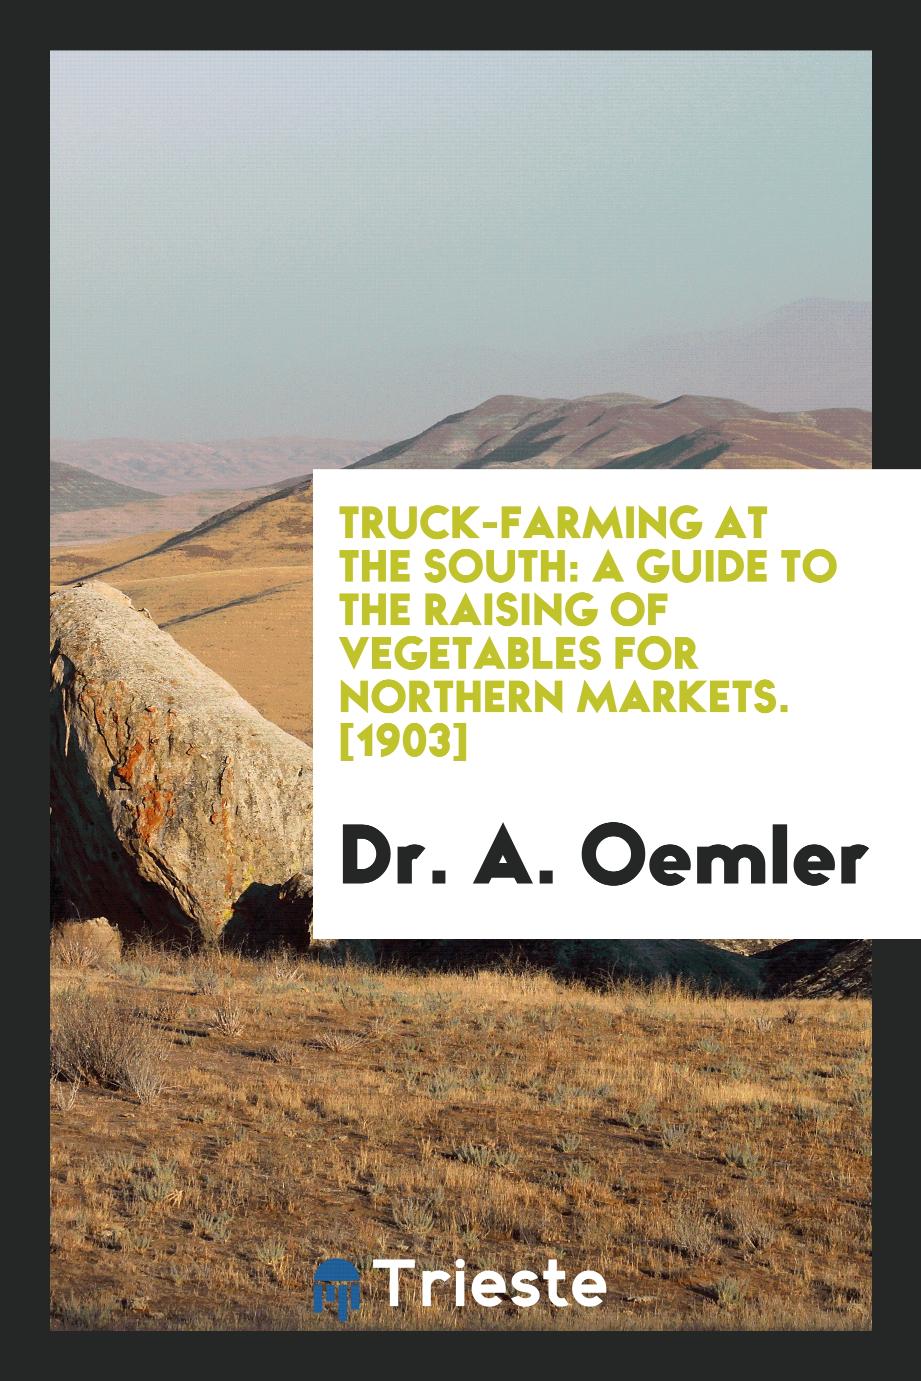 Truck-Farming at the South: A Guide to the Raising of Vegetables for Northern Markets. [1903]